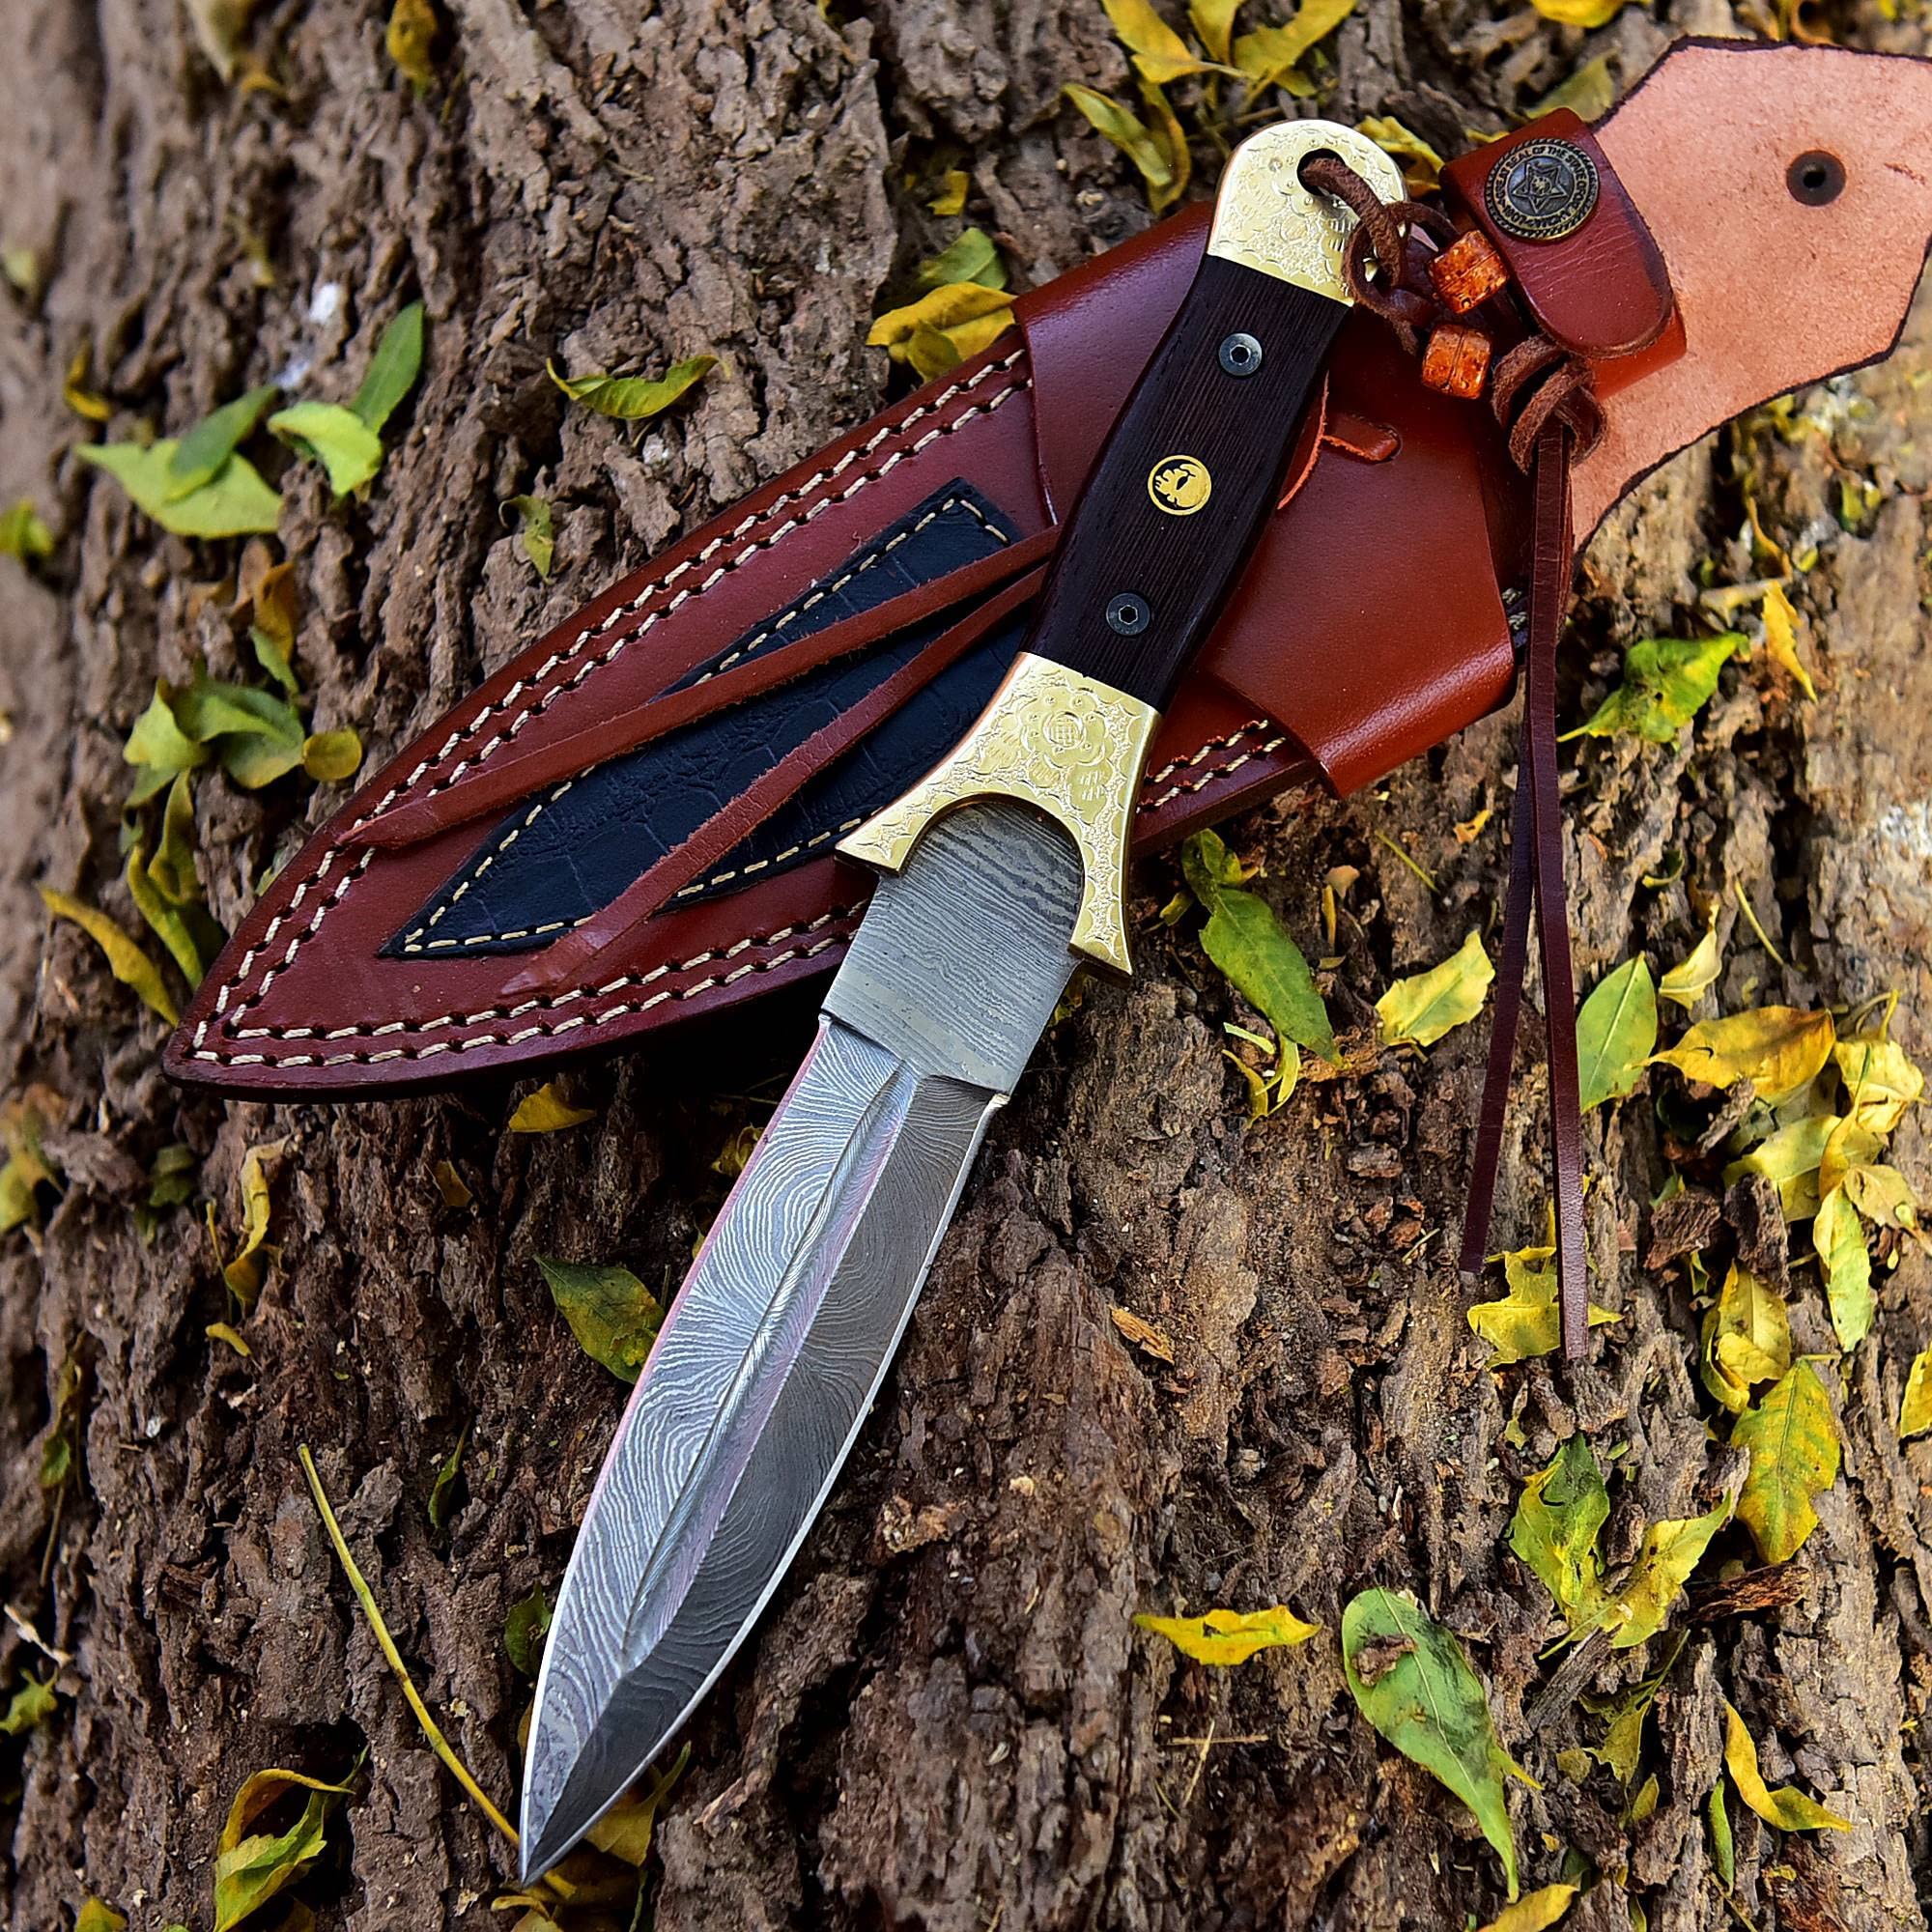 Damascus Steel fixed Blade Hunting Knife with Leather Sheath - Camping/Survival/Tactical/Handmade